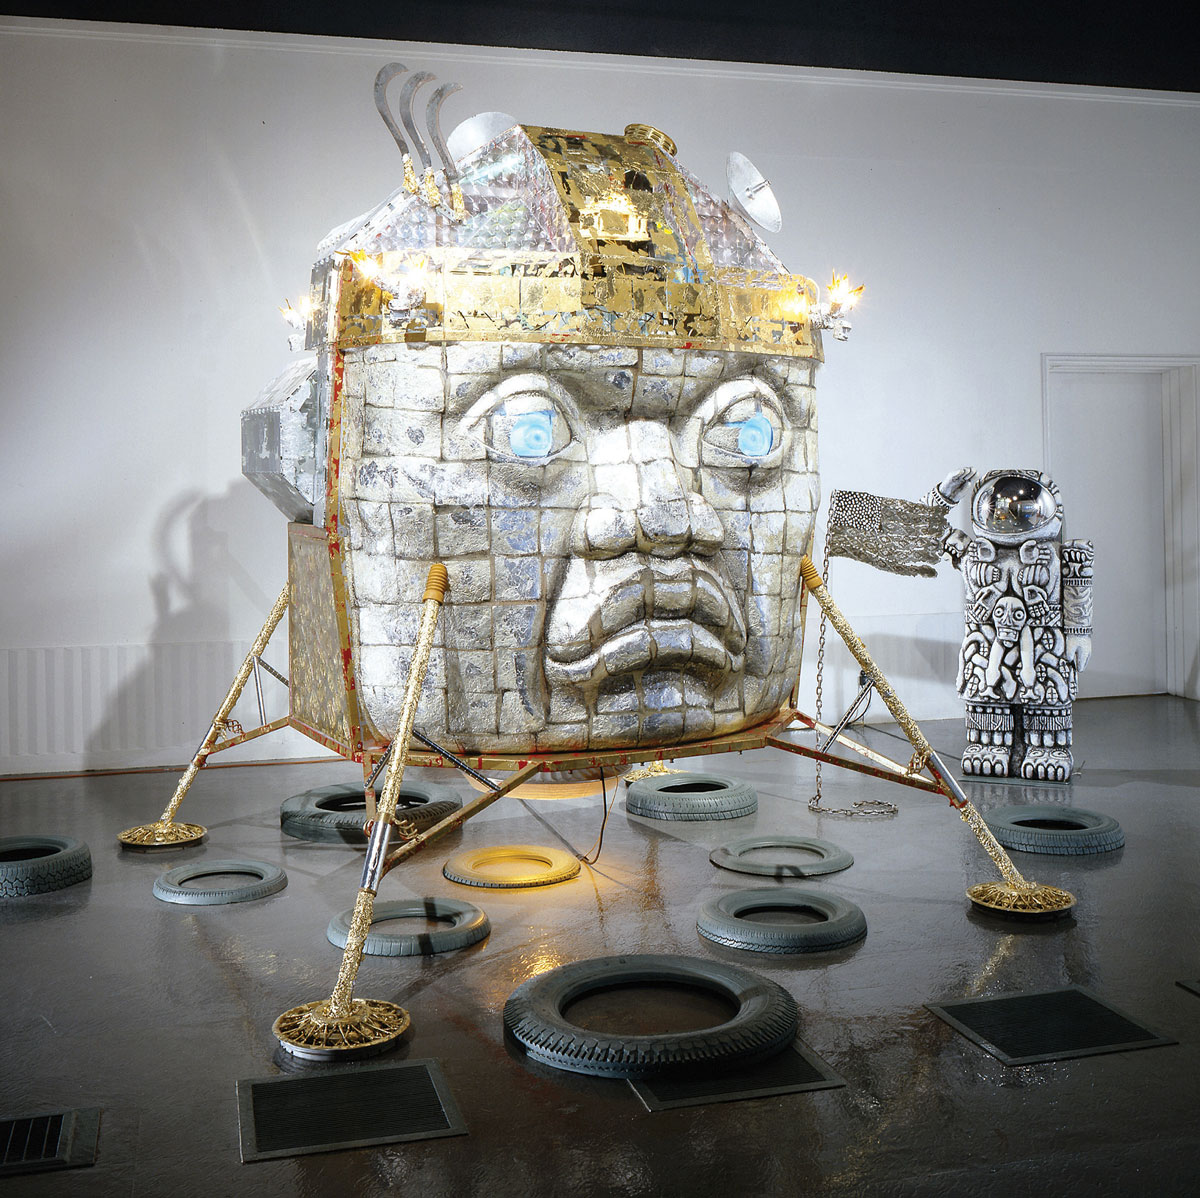 A photograph of a 2002 mixed media installation of a large metallic head by Einar & Jamex de la Torre, entitled “Colonial Atmosphere.”